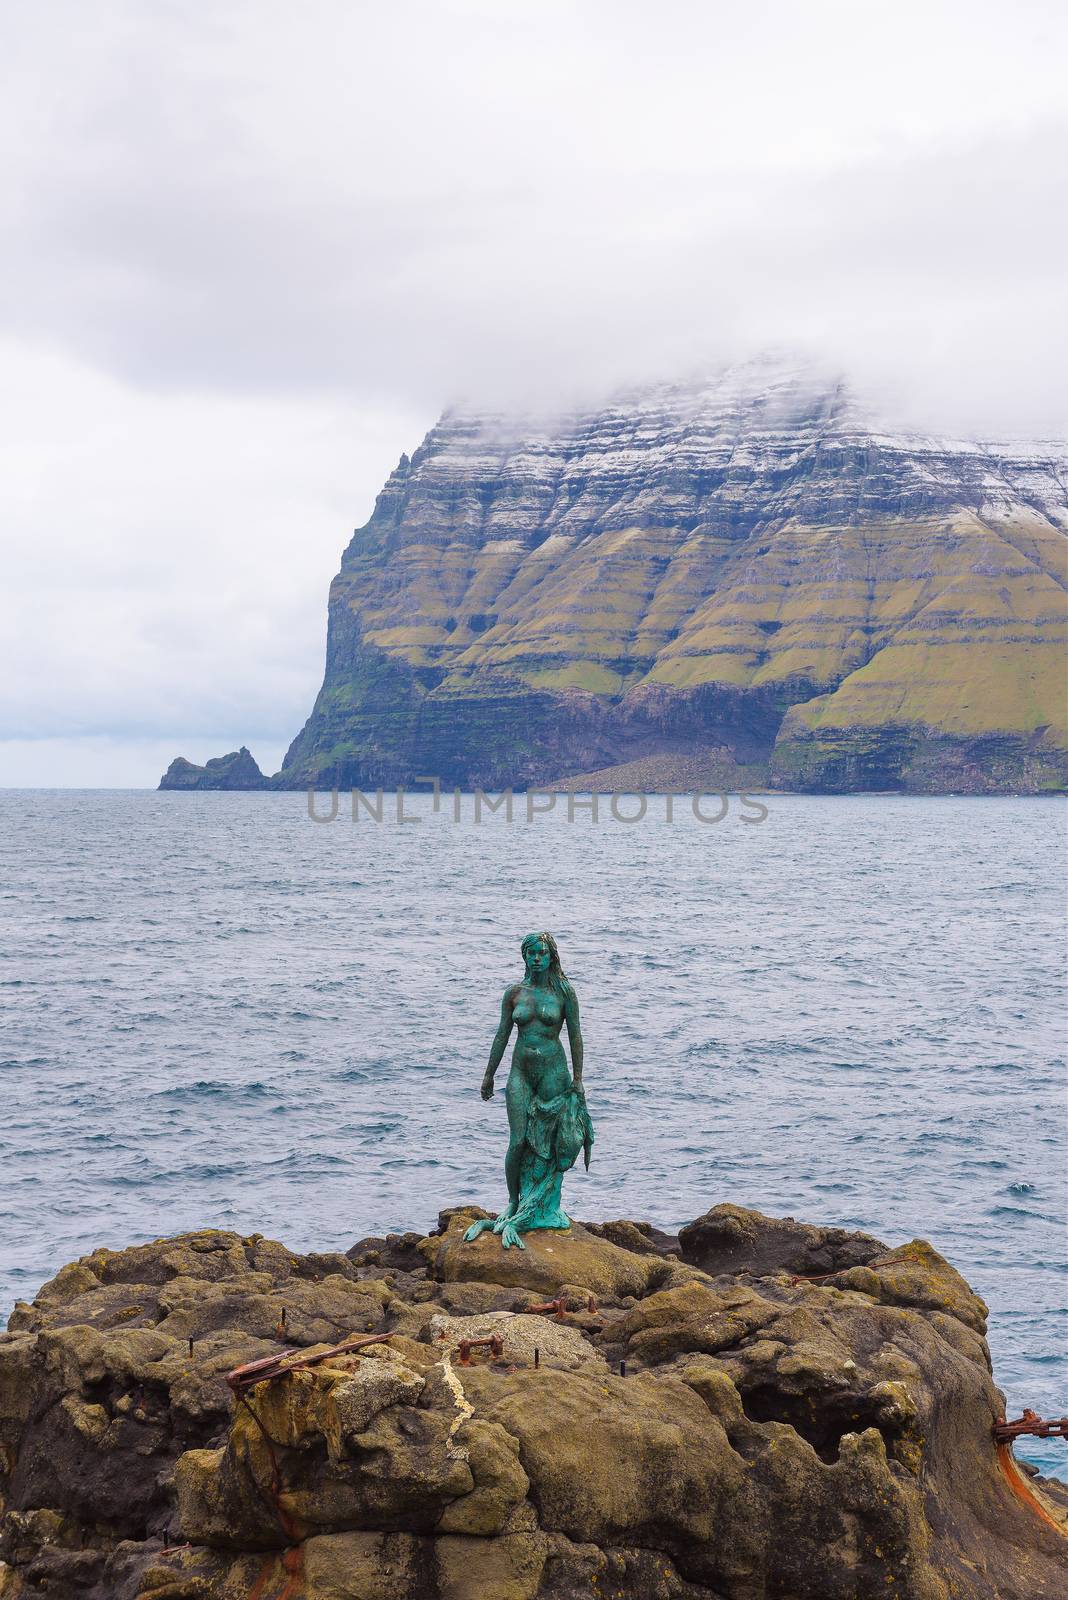 Mikladalur, Faroe Islands, Denmark - May 27, 2019 : Statue of Selkie or Seal Wife in Mikladalur on the island of Kalsoy. Selkies are mythological creatures in Irish, Scottish, and Faroese folklore.